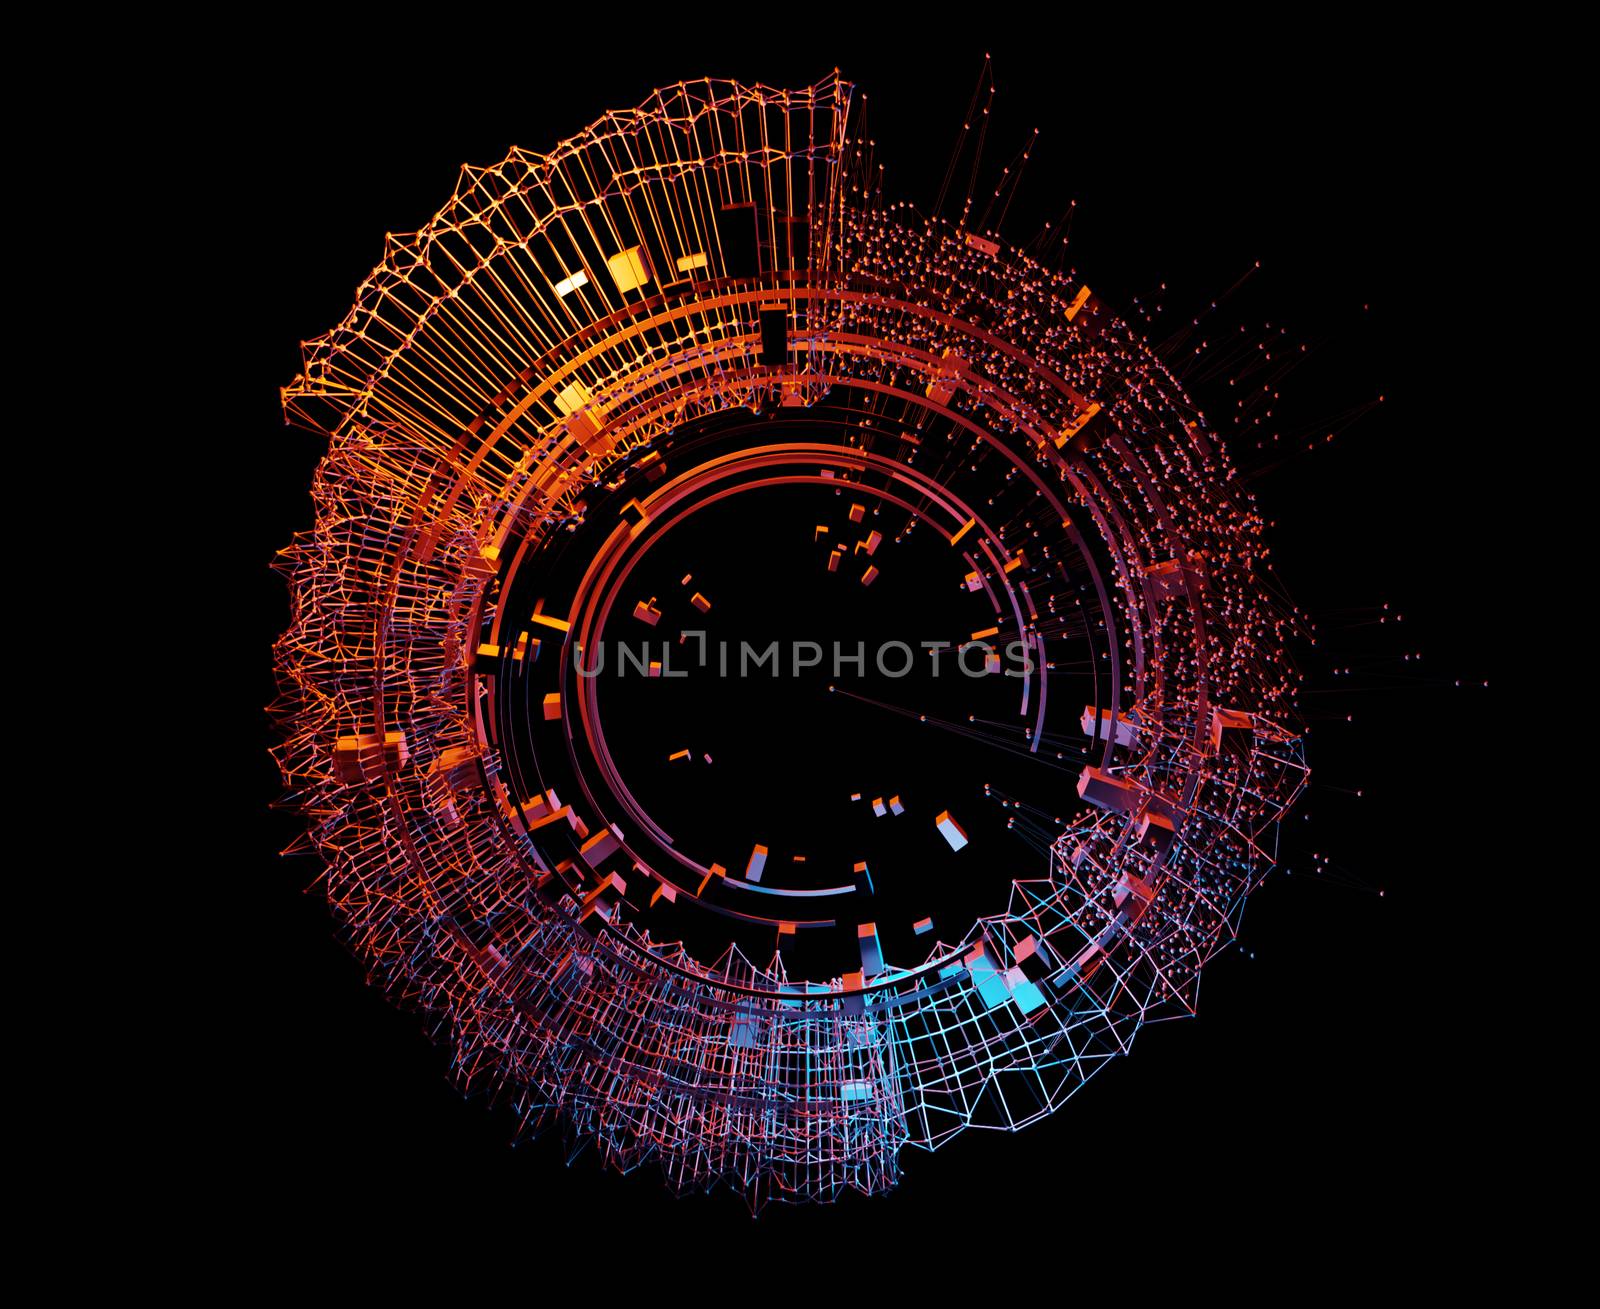 Abstract 3D rendering of chaotic objects. Concept Design Abstract Architecture or HUD Element or Space Station